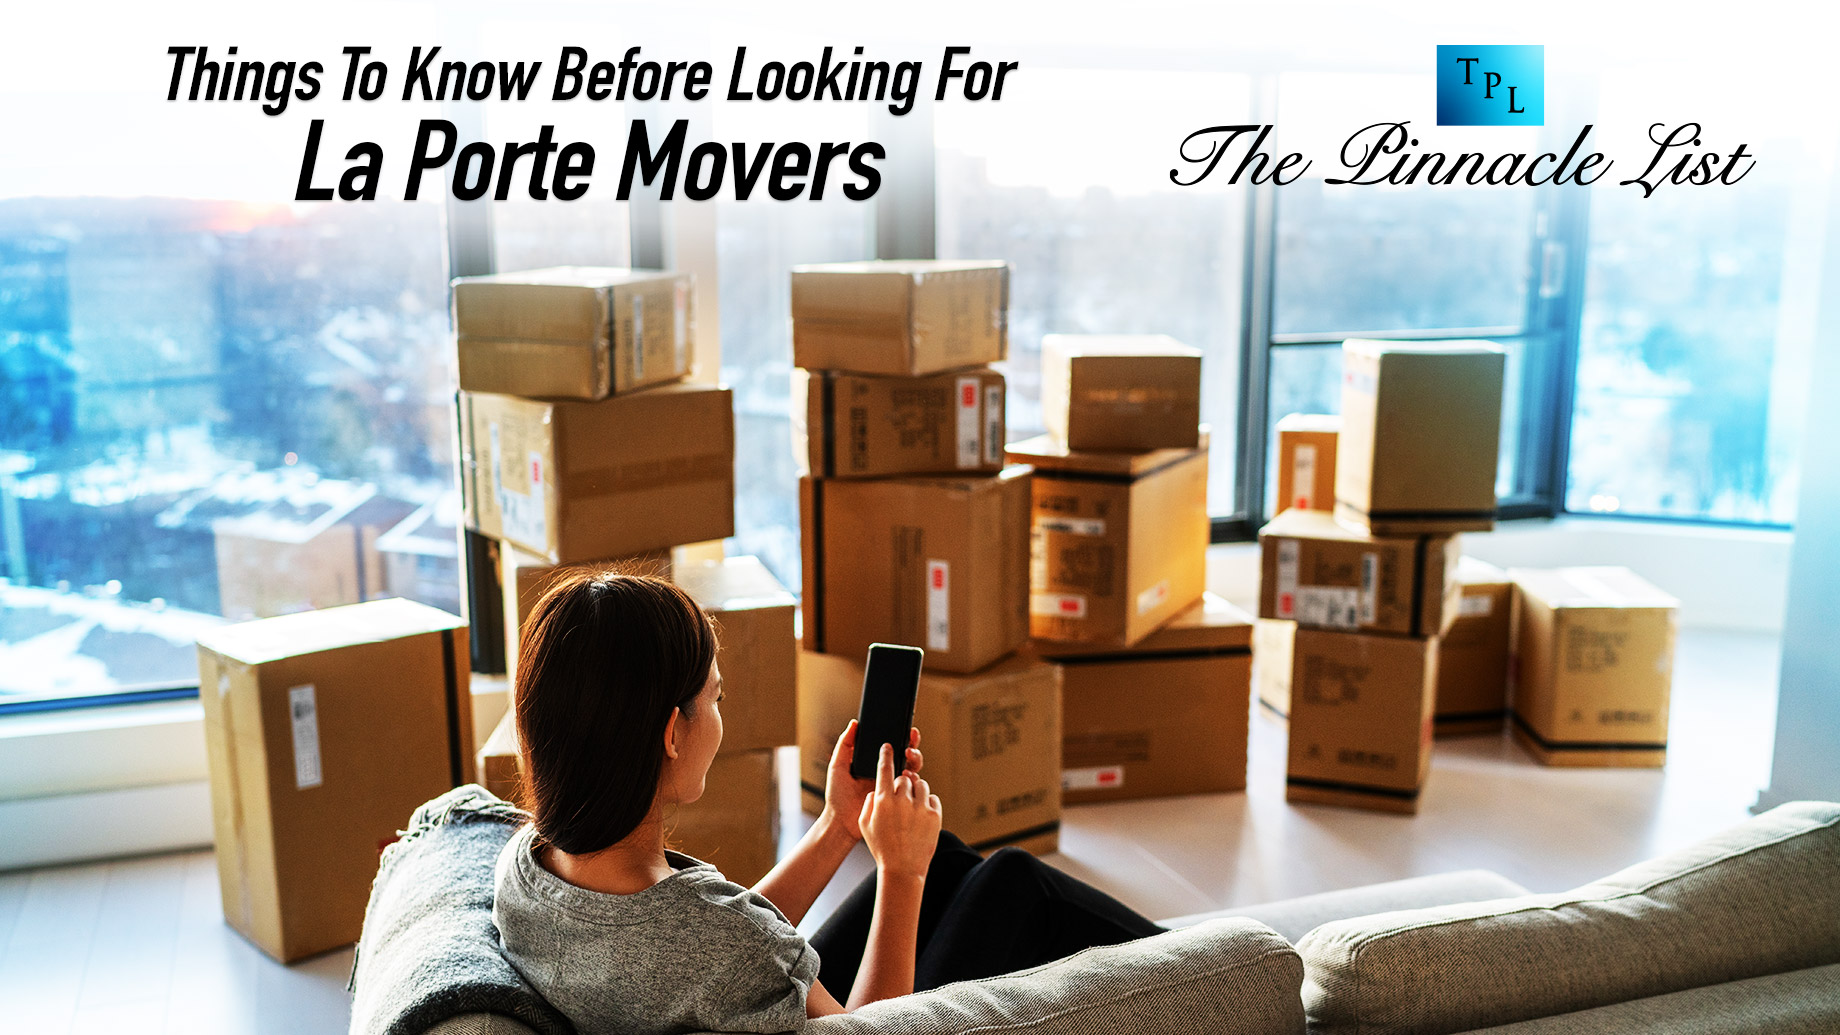 Things To Know Before Looking For La Porte Movers